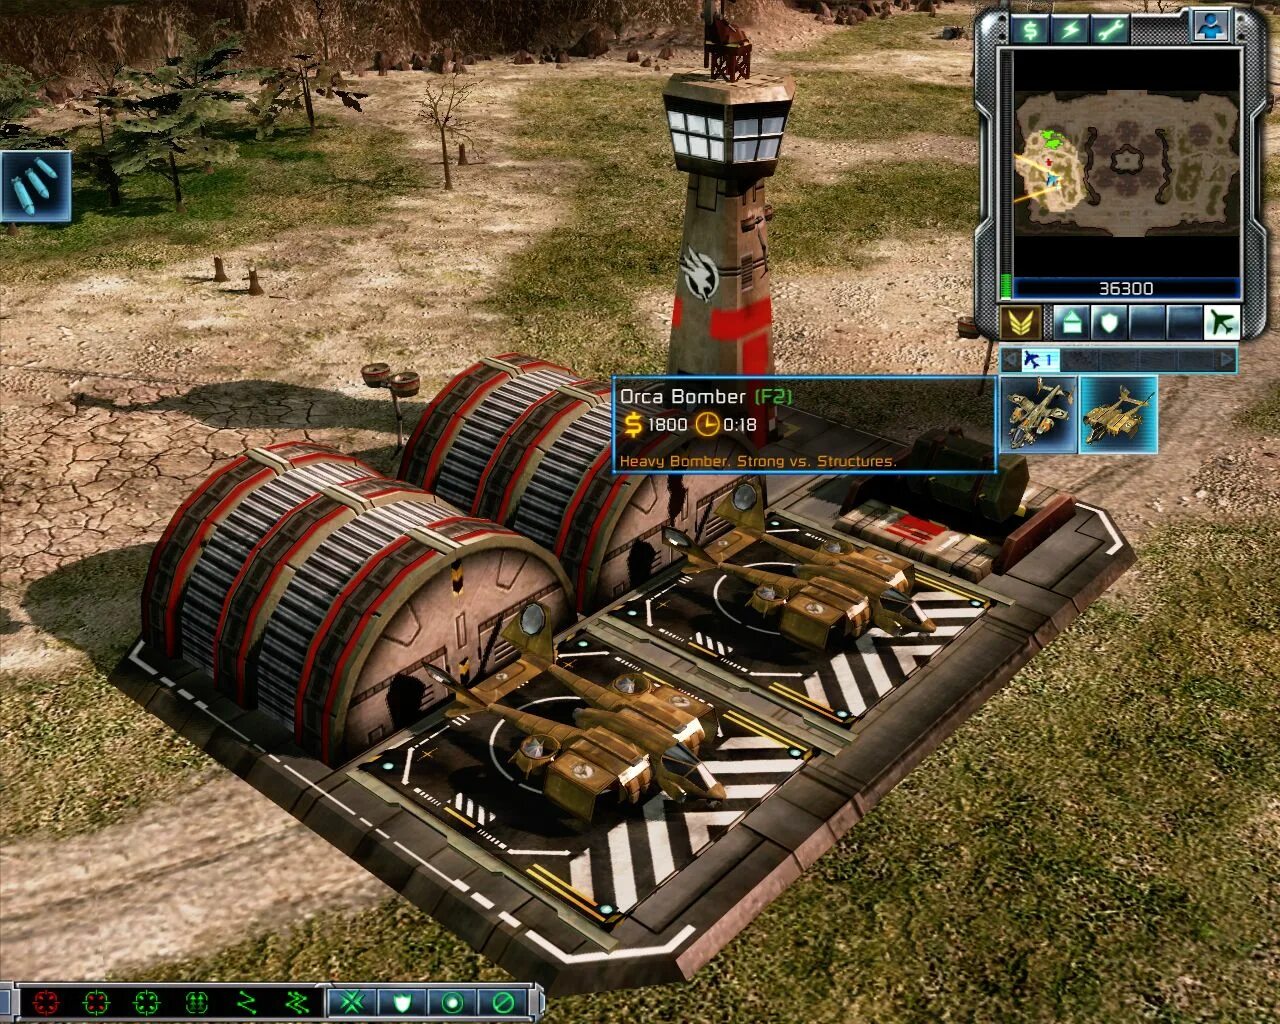 Orca Bomber. Command and Conquer бомбер. Command and Conquer Orka. Command and Conquer 3 Tiberium Wars Mods.